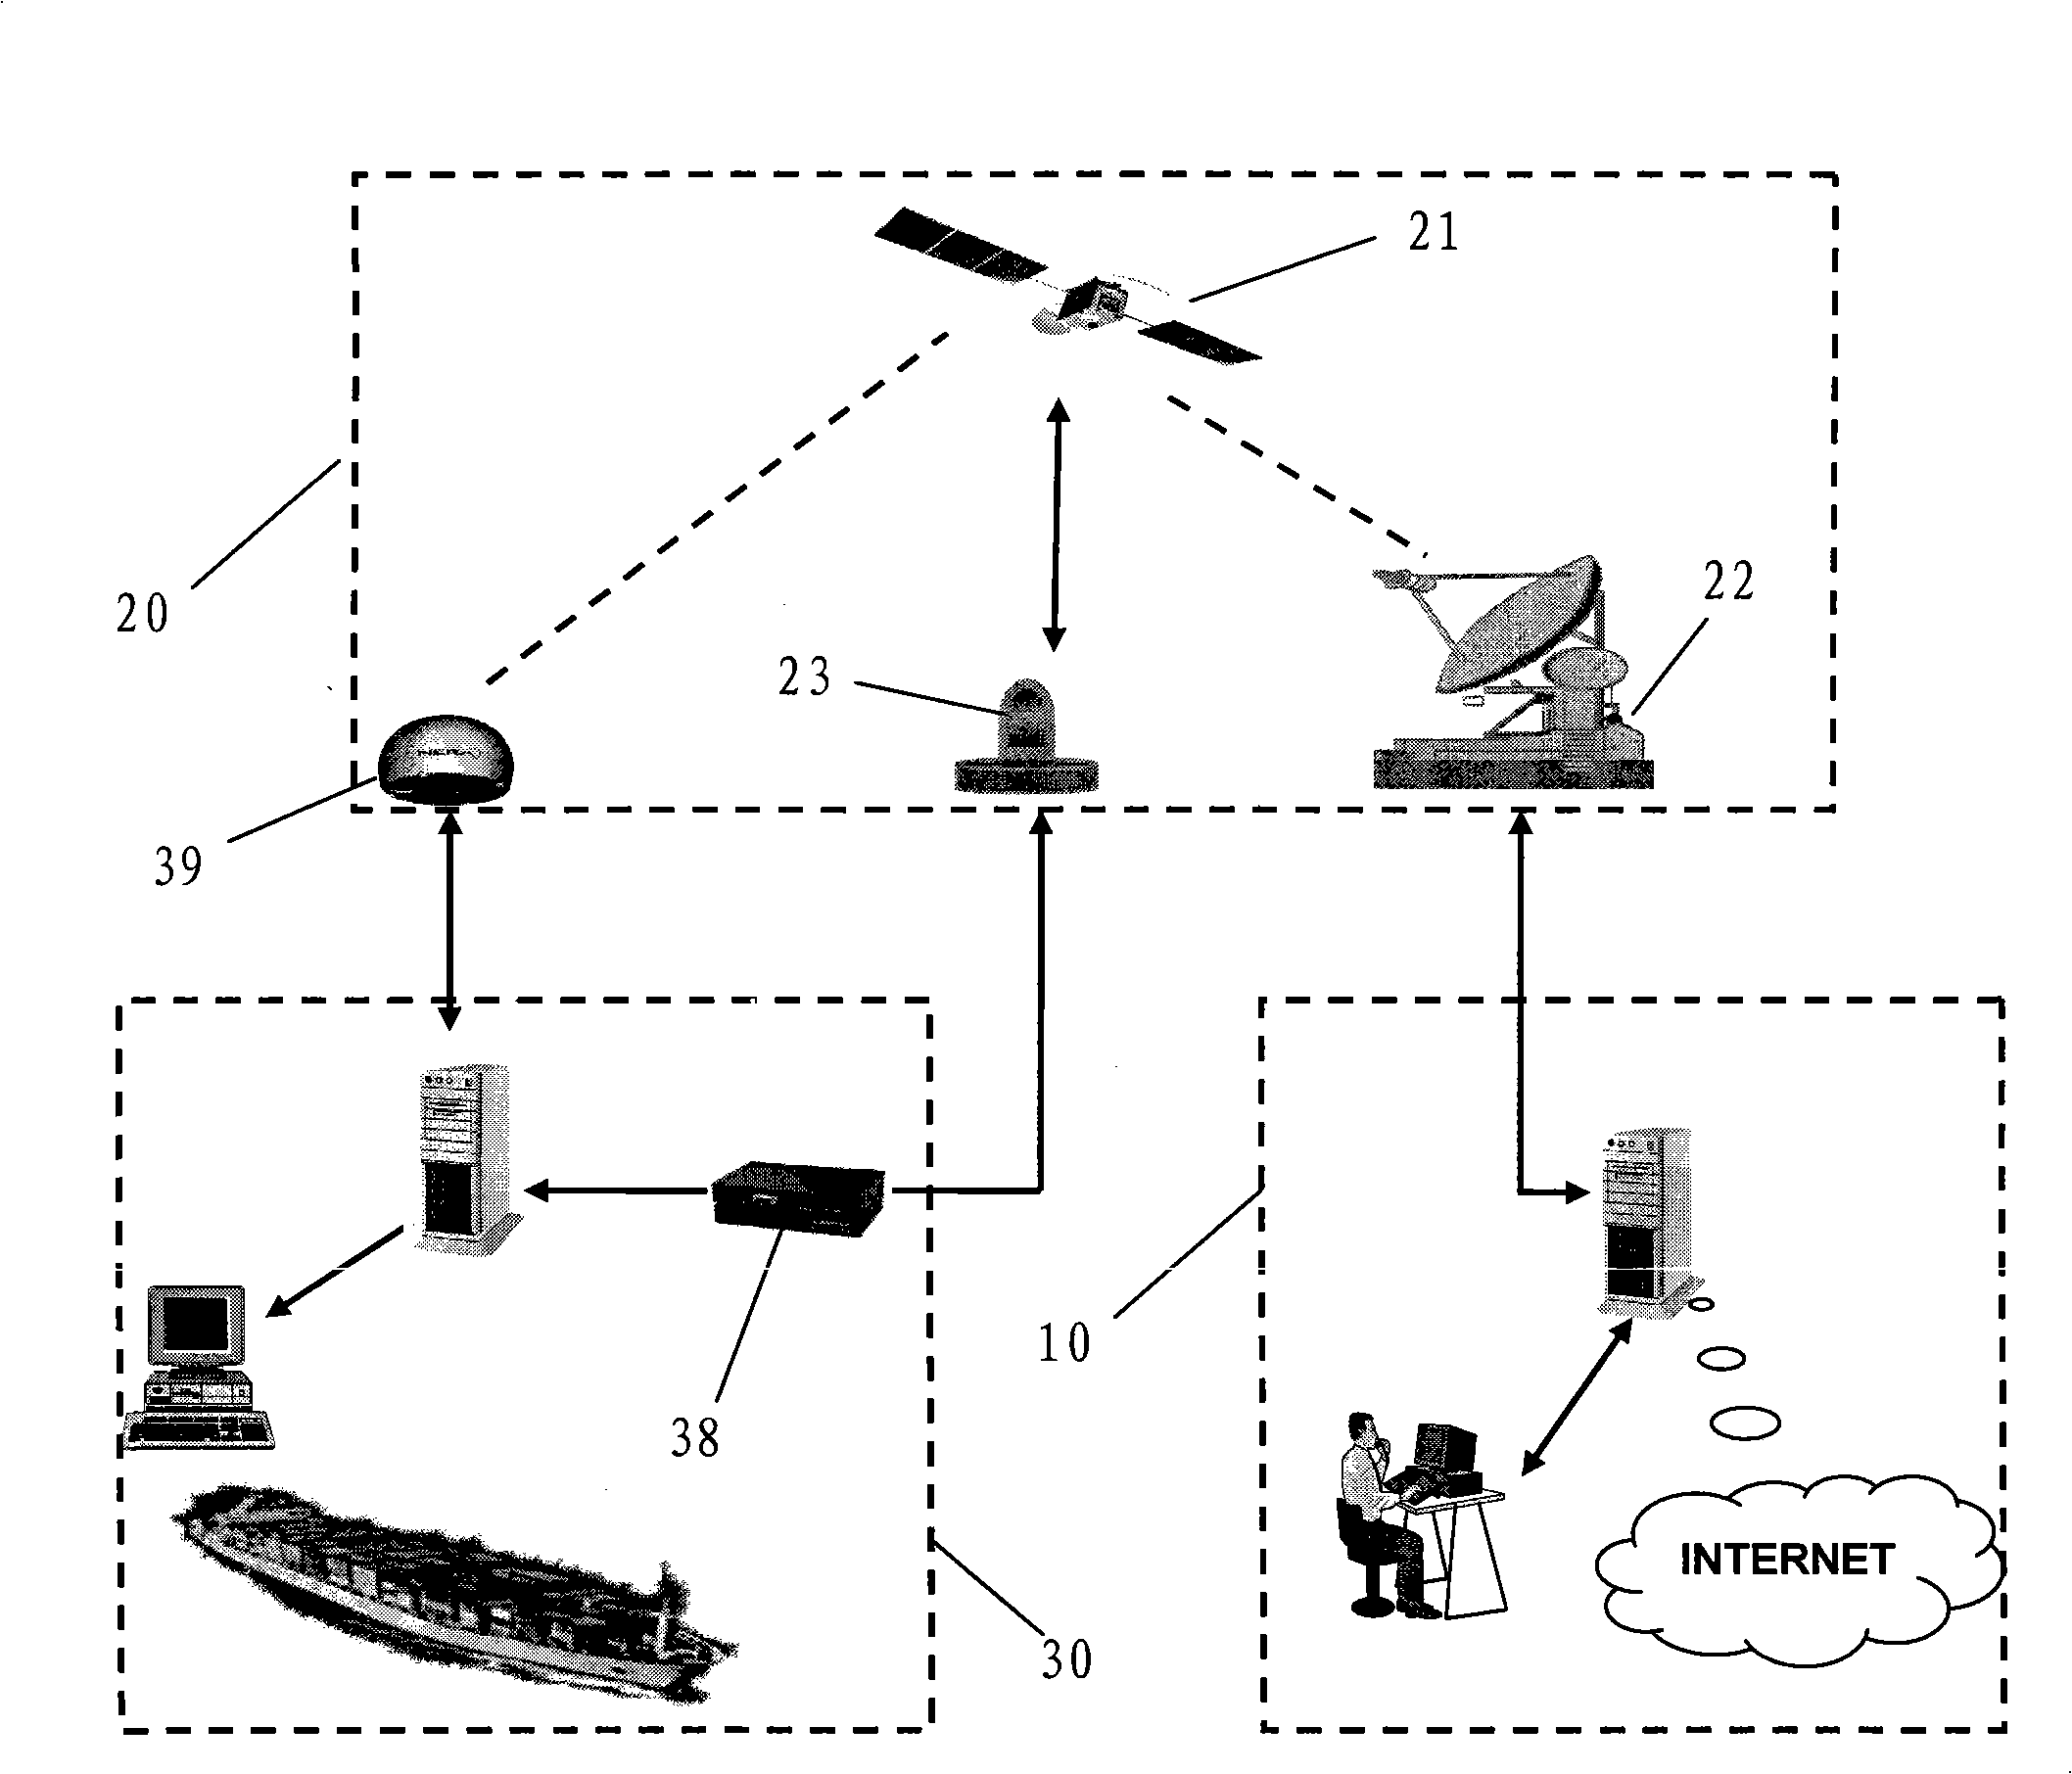 Transmission system for transmitting instruction from bank to assigned vessel through satellite